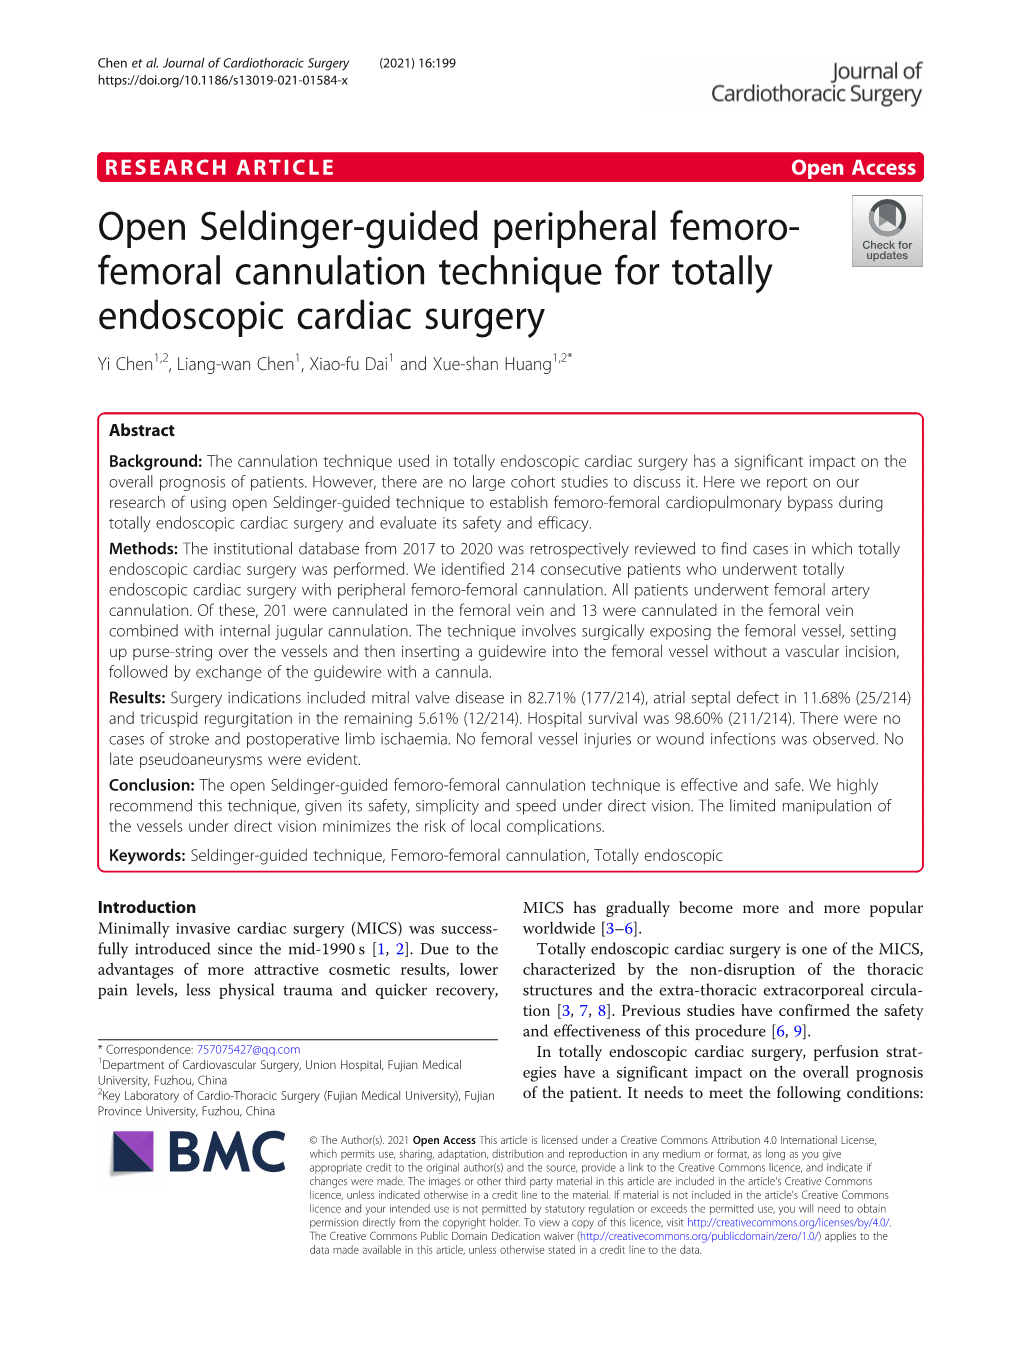 Open Seldinger-Guided Peripheral Femoro-Femoral Cannulation